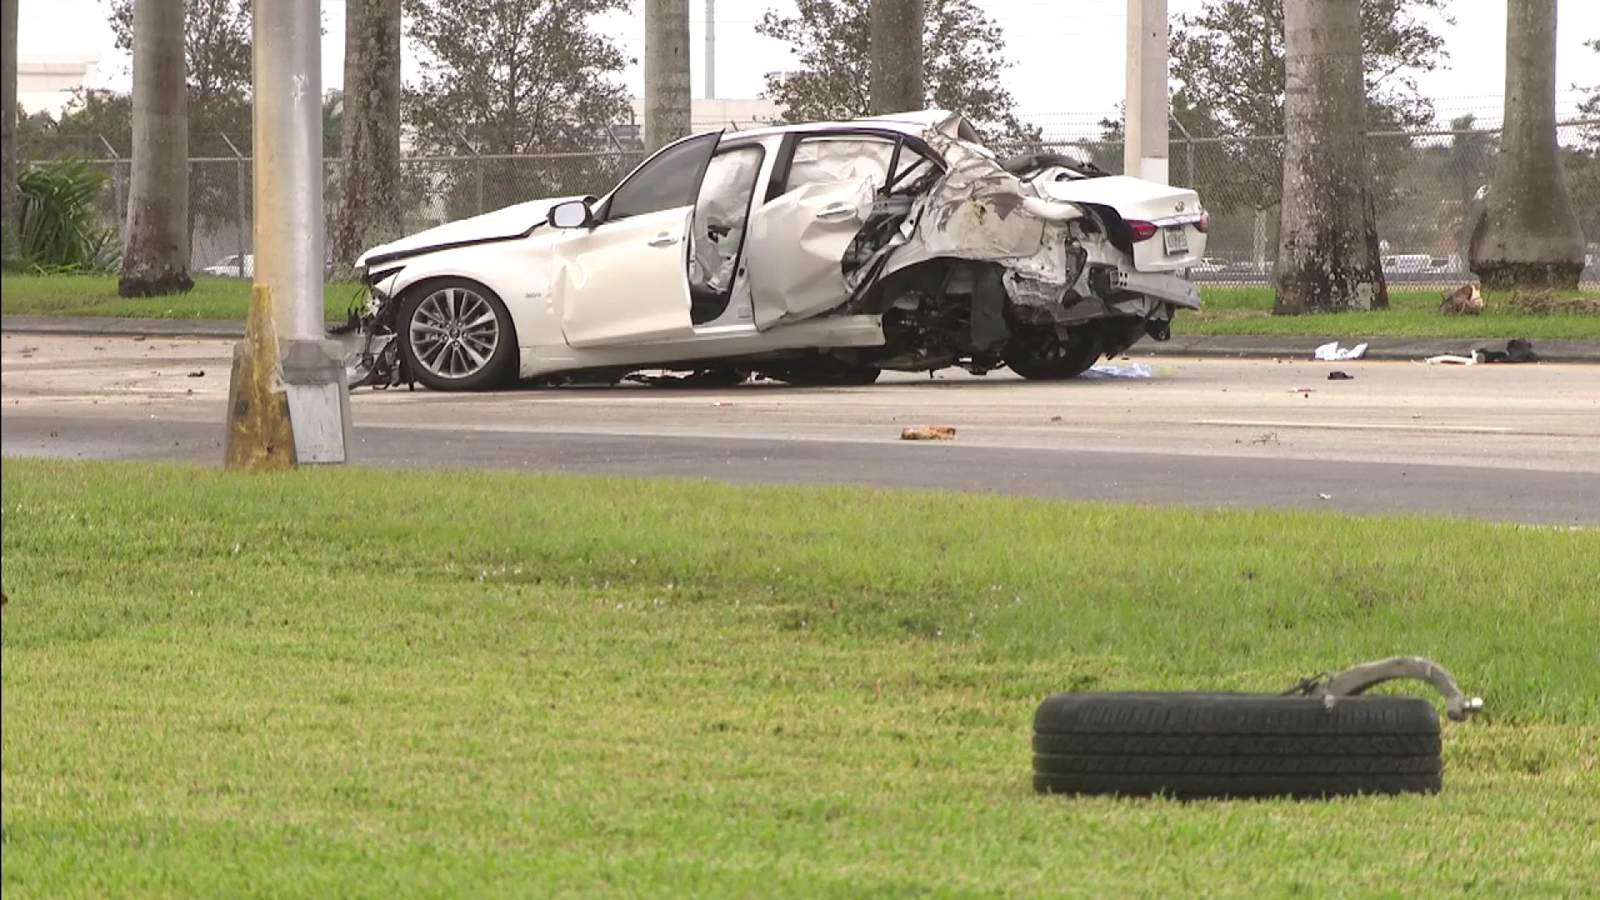 SW Miami-Dade morning crash injures 1 adult, 4 juveniles after driver crashes into palm tree